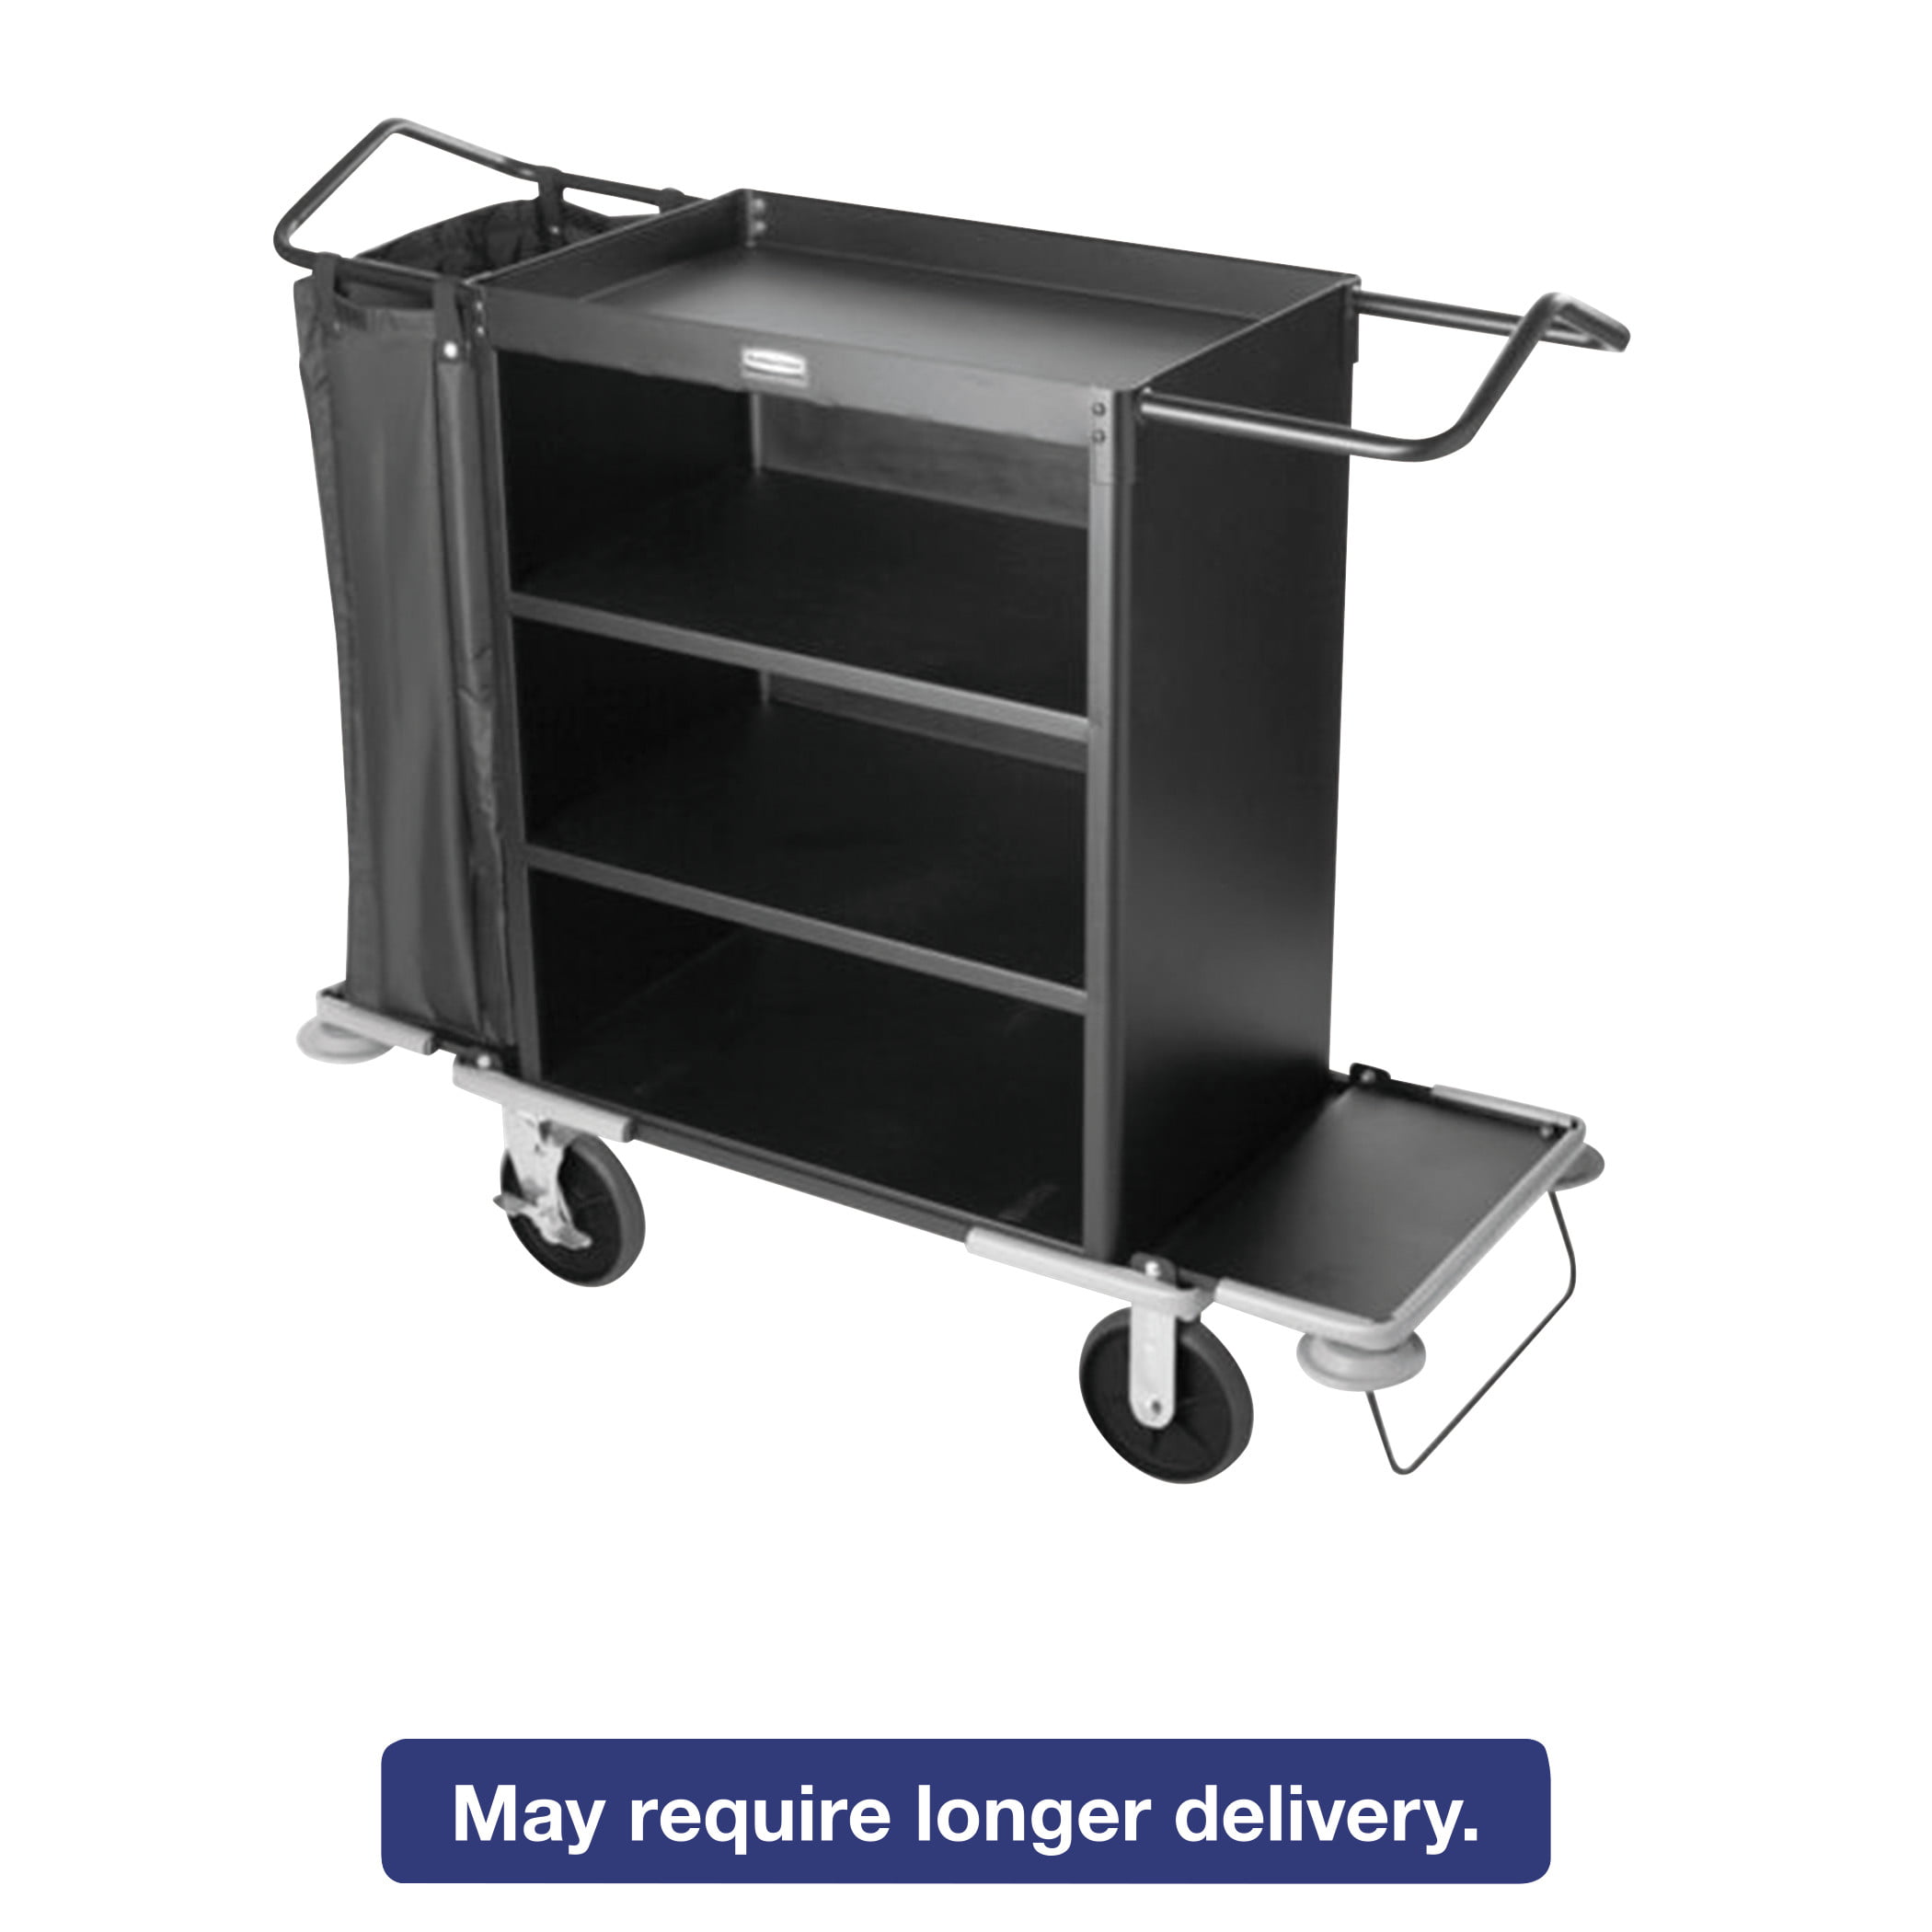 High-Security Housekeeping Cart, Plastic, 3 Shelves, 2 Bins, 22 x 51.75 x  53.5, Black/Silver - Buy Janitorial Direct